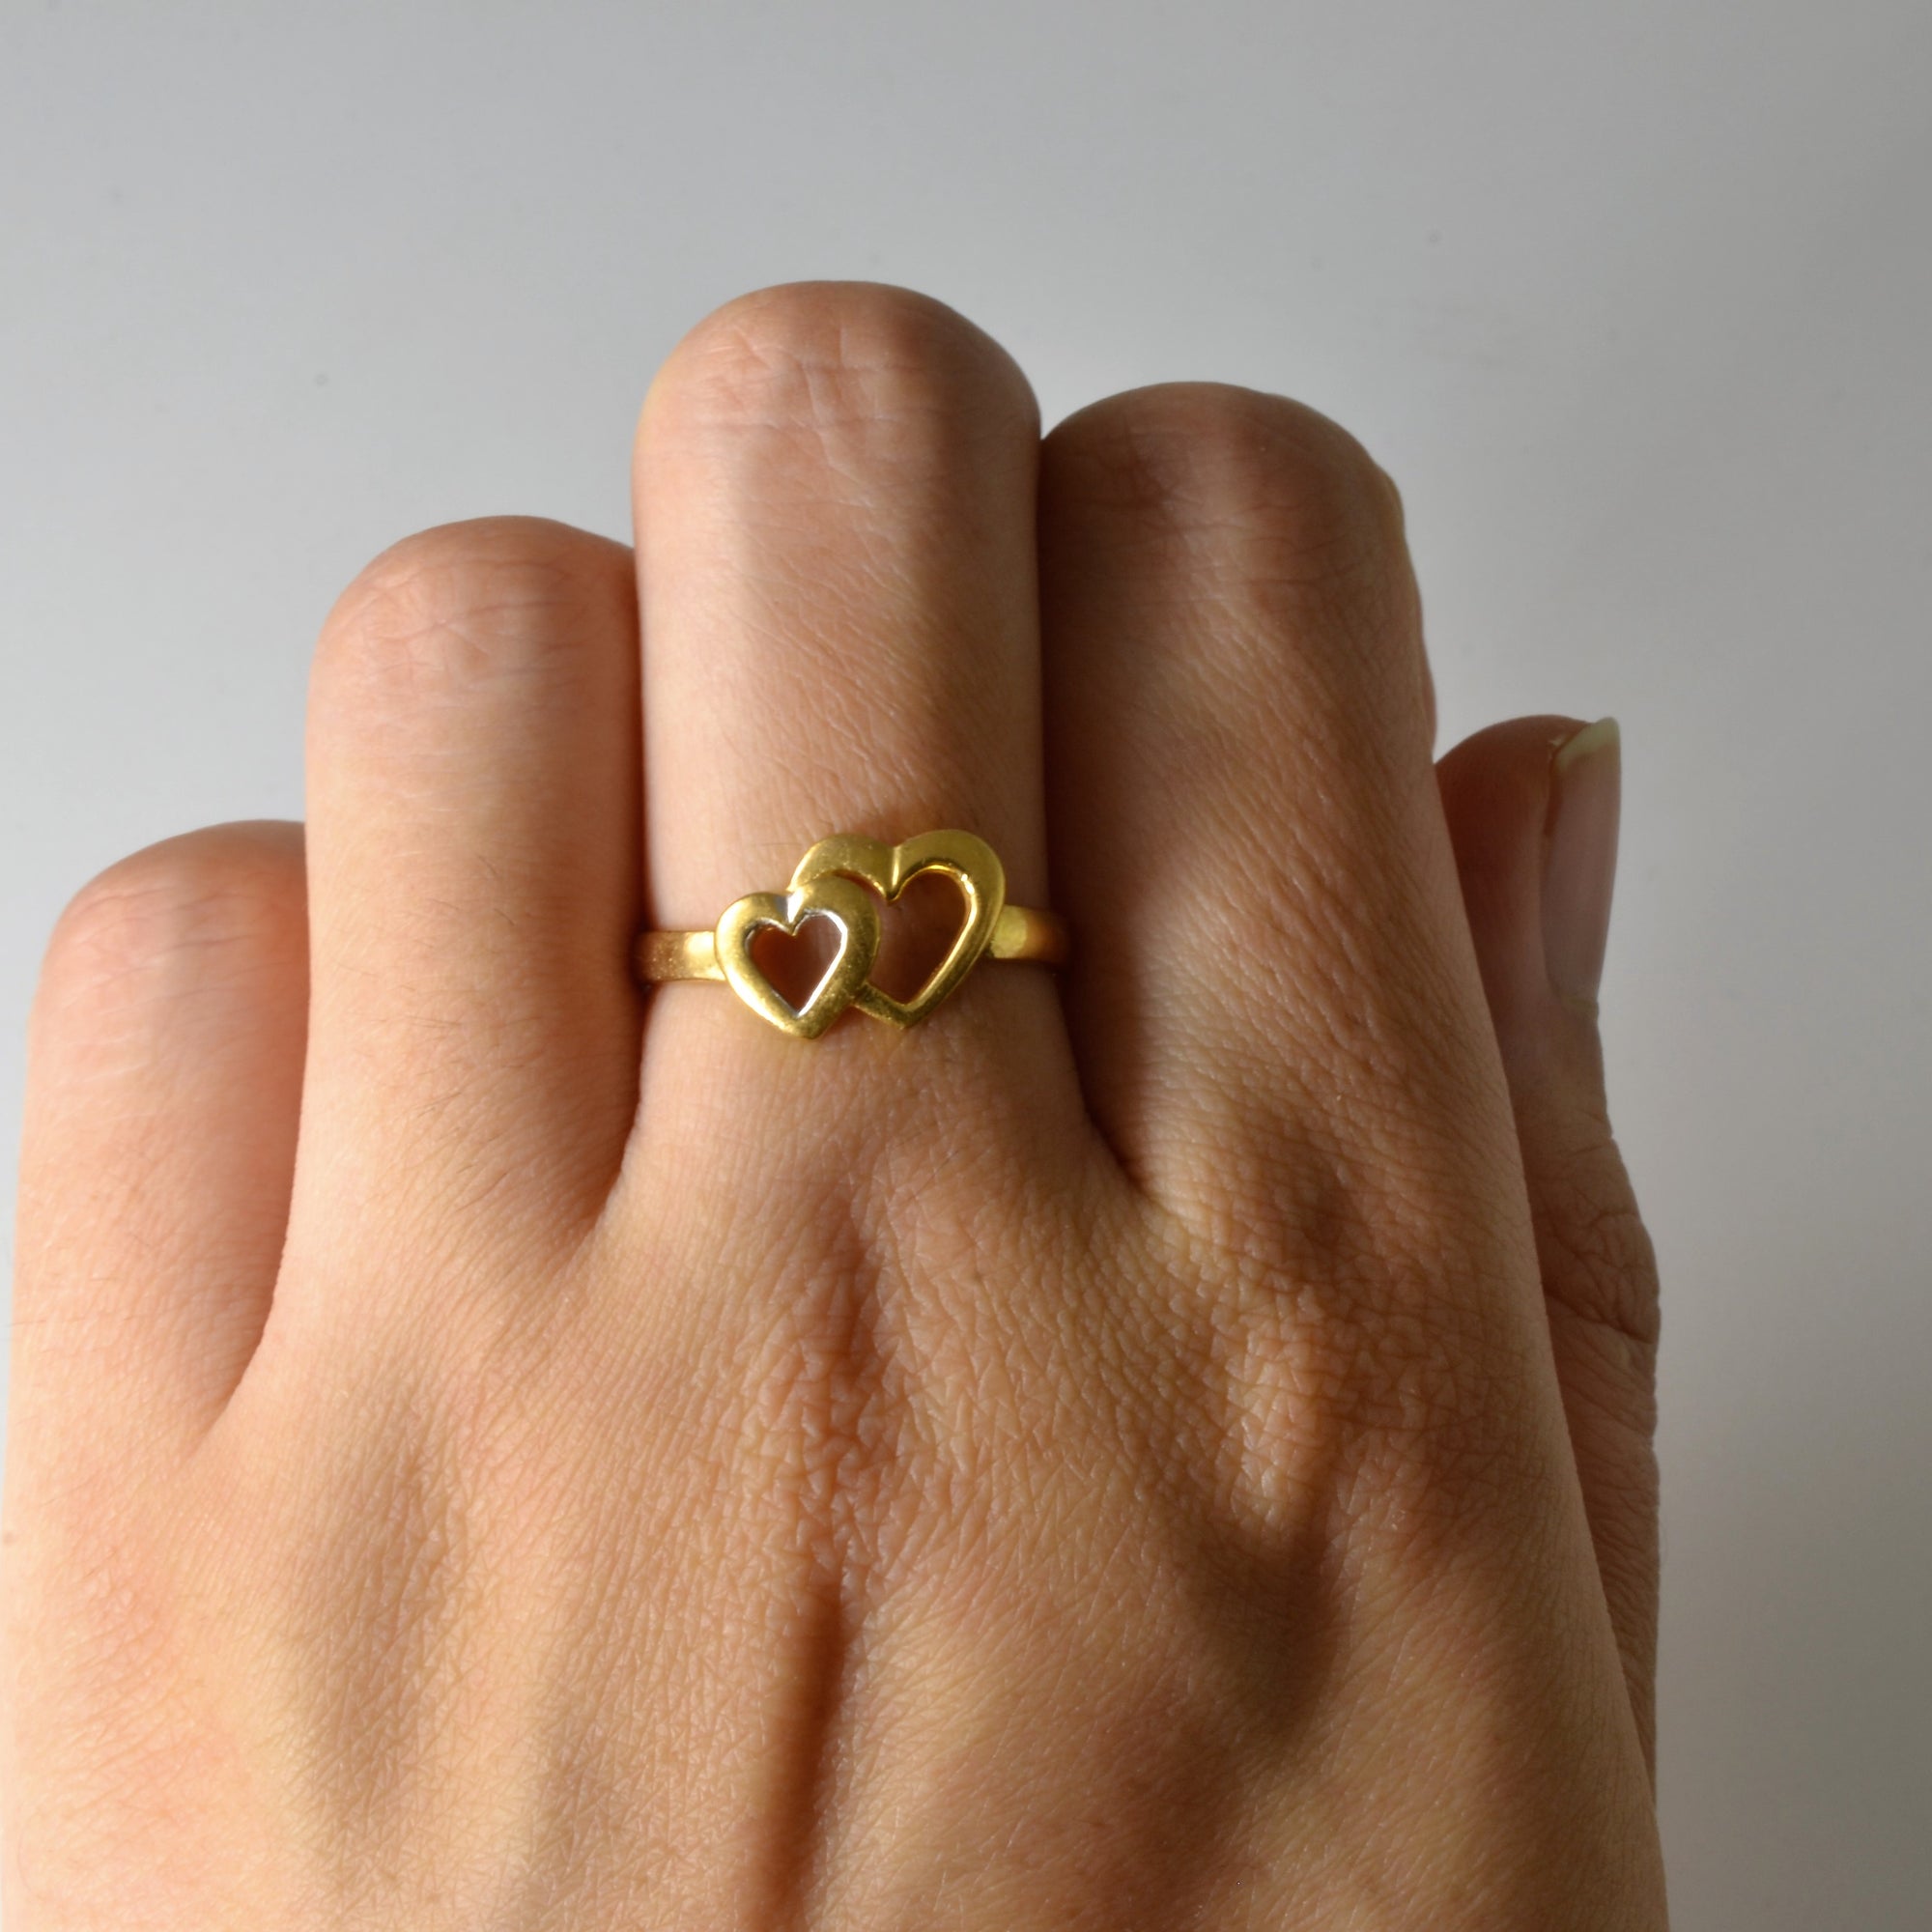 14k Yellow Gold Double Heart Ring With Diamonds. Size 6.25 R652 - Etsy